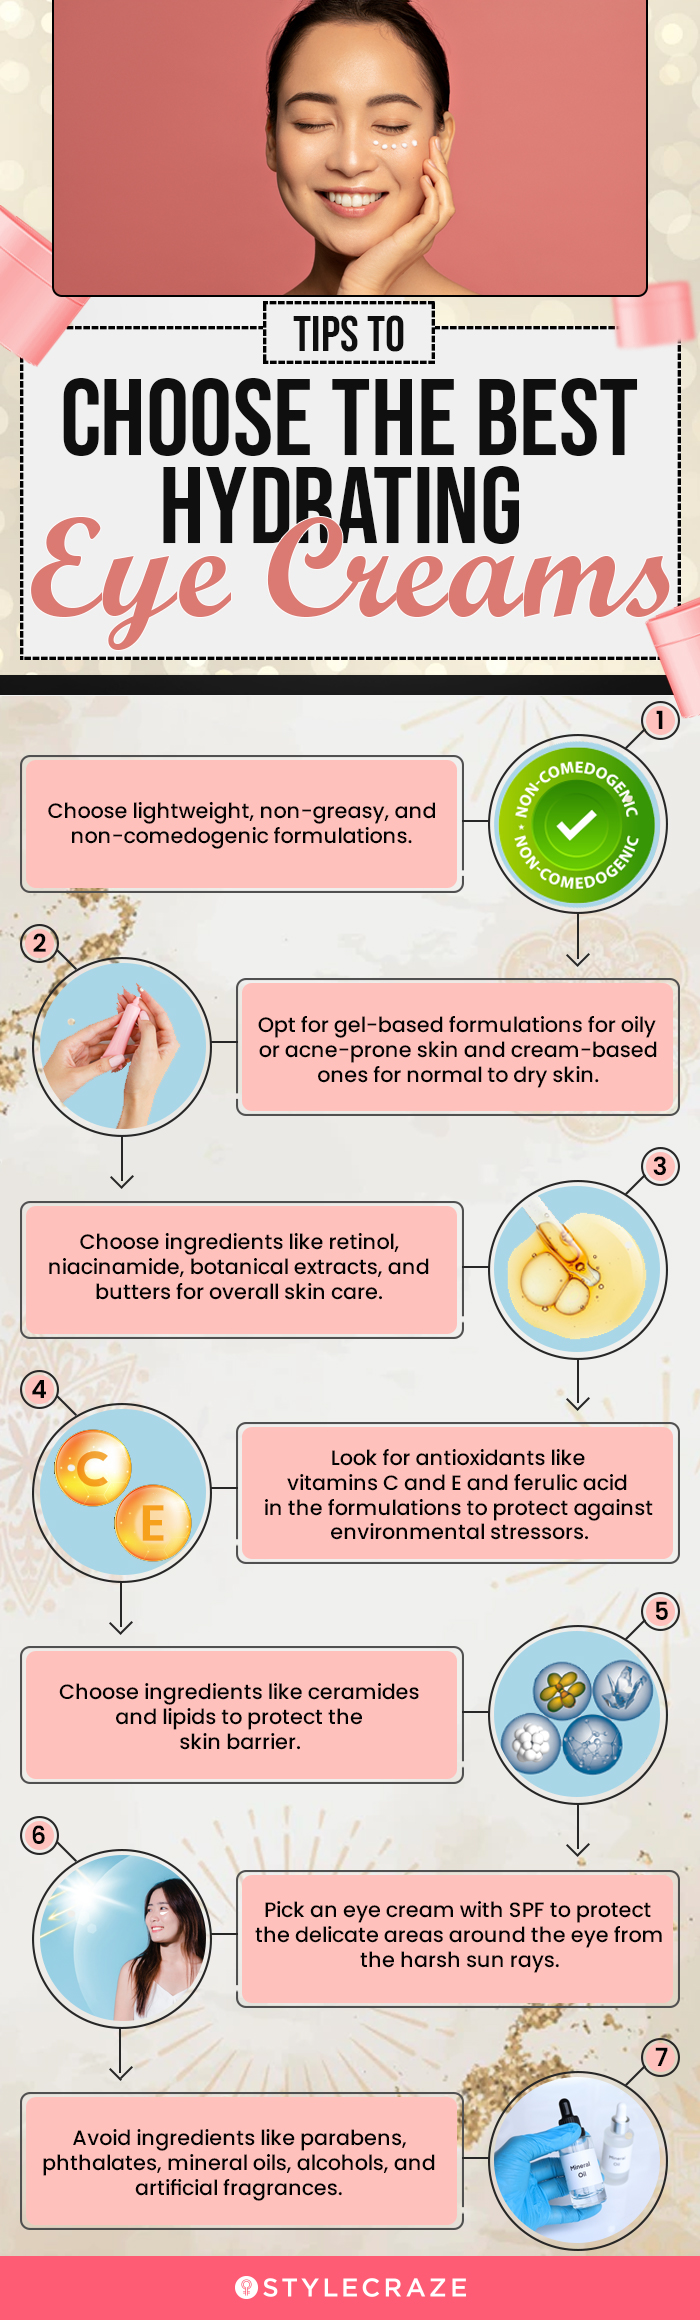 Tips To Choose The Best Hydrating Eye Creams (infographic)